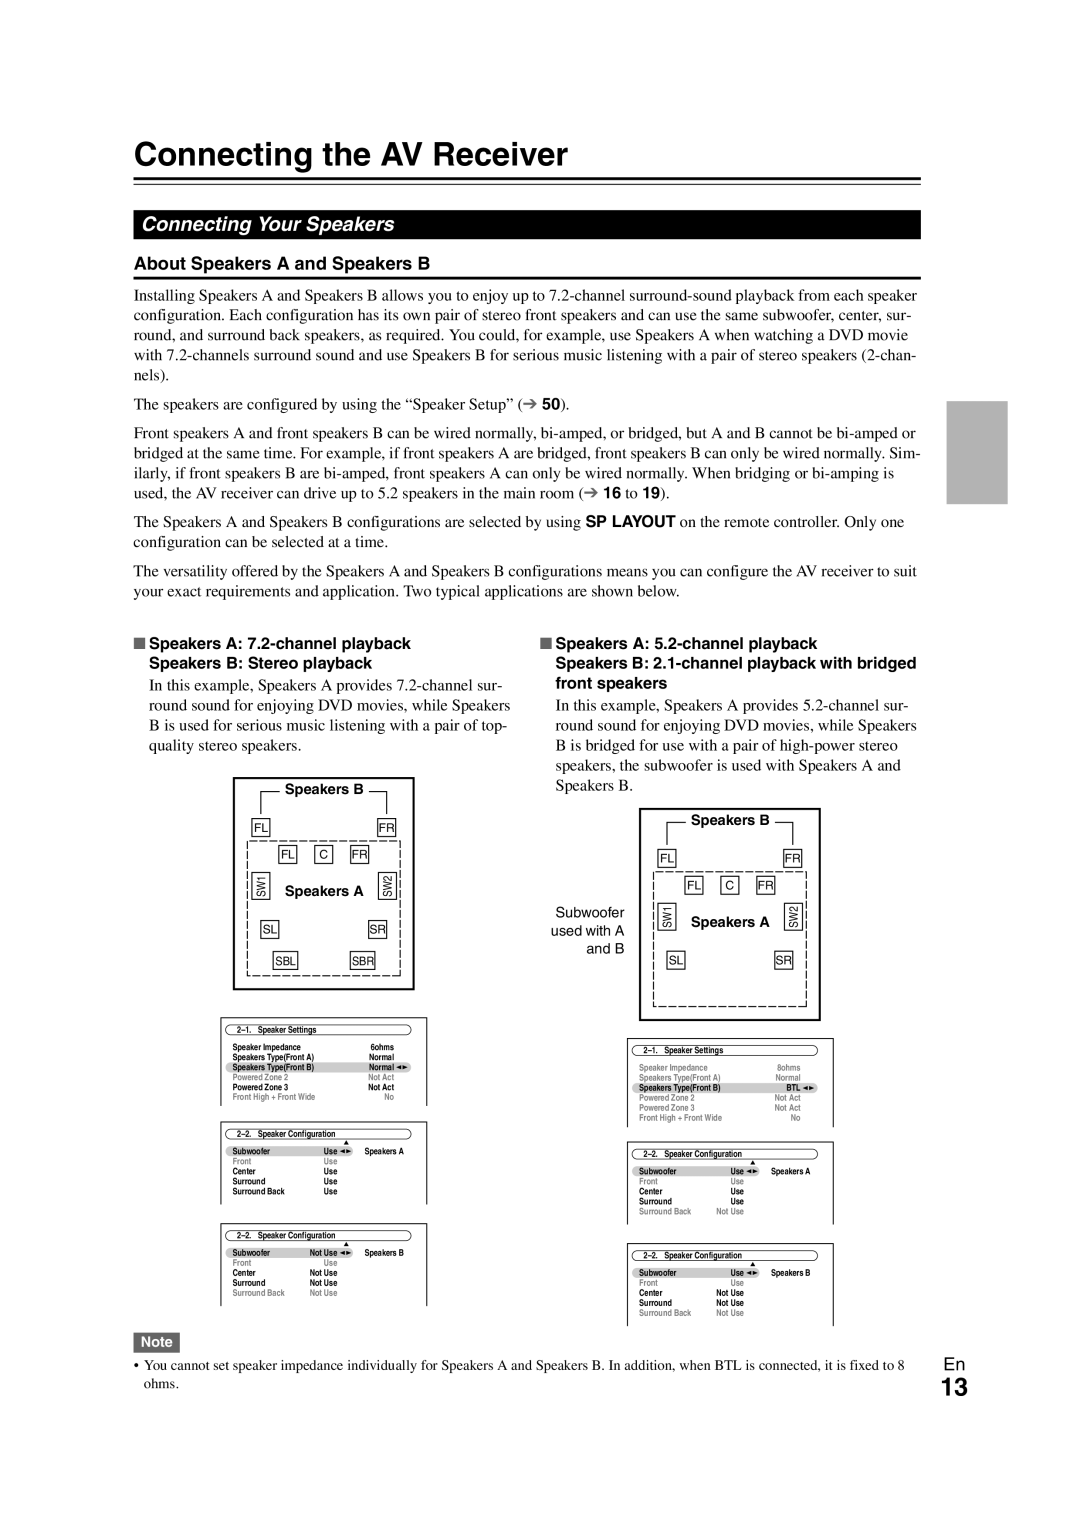 Onkyo TX-NR3008 instruction manual Connecting the AV Receiver, Connecting Your Speakers, About Speakers A and Speakers B 